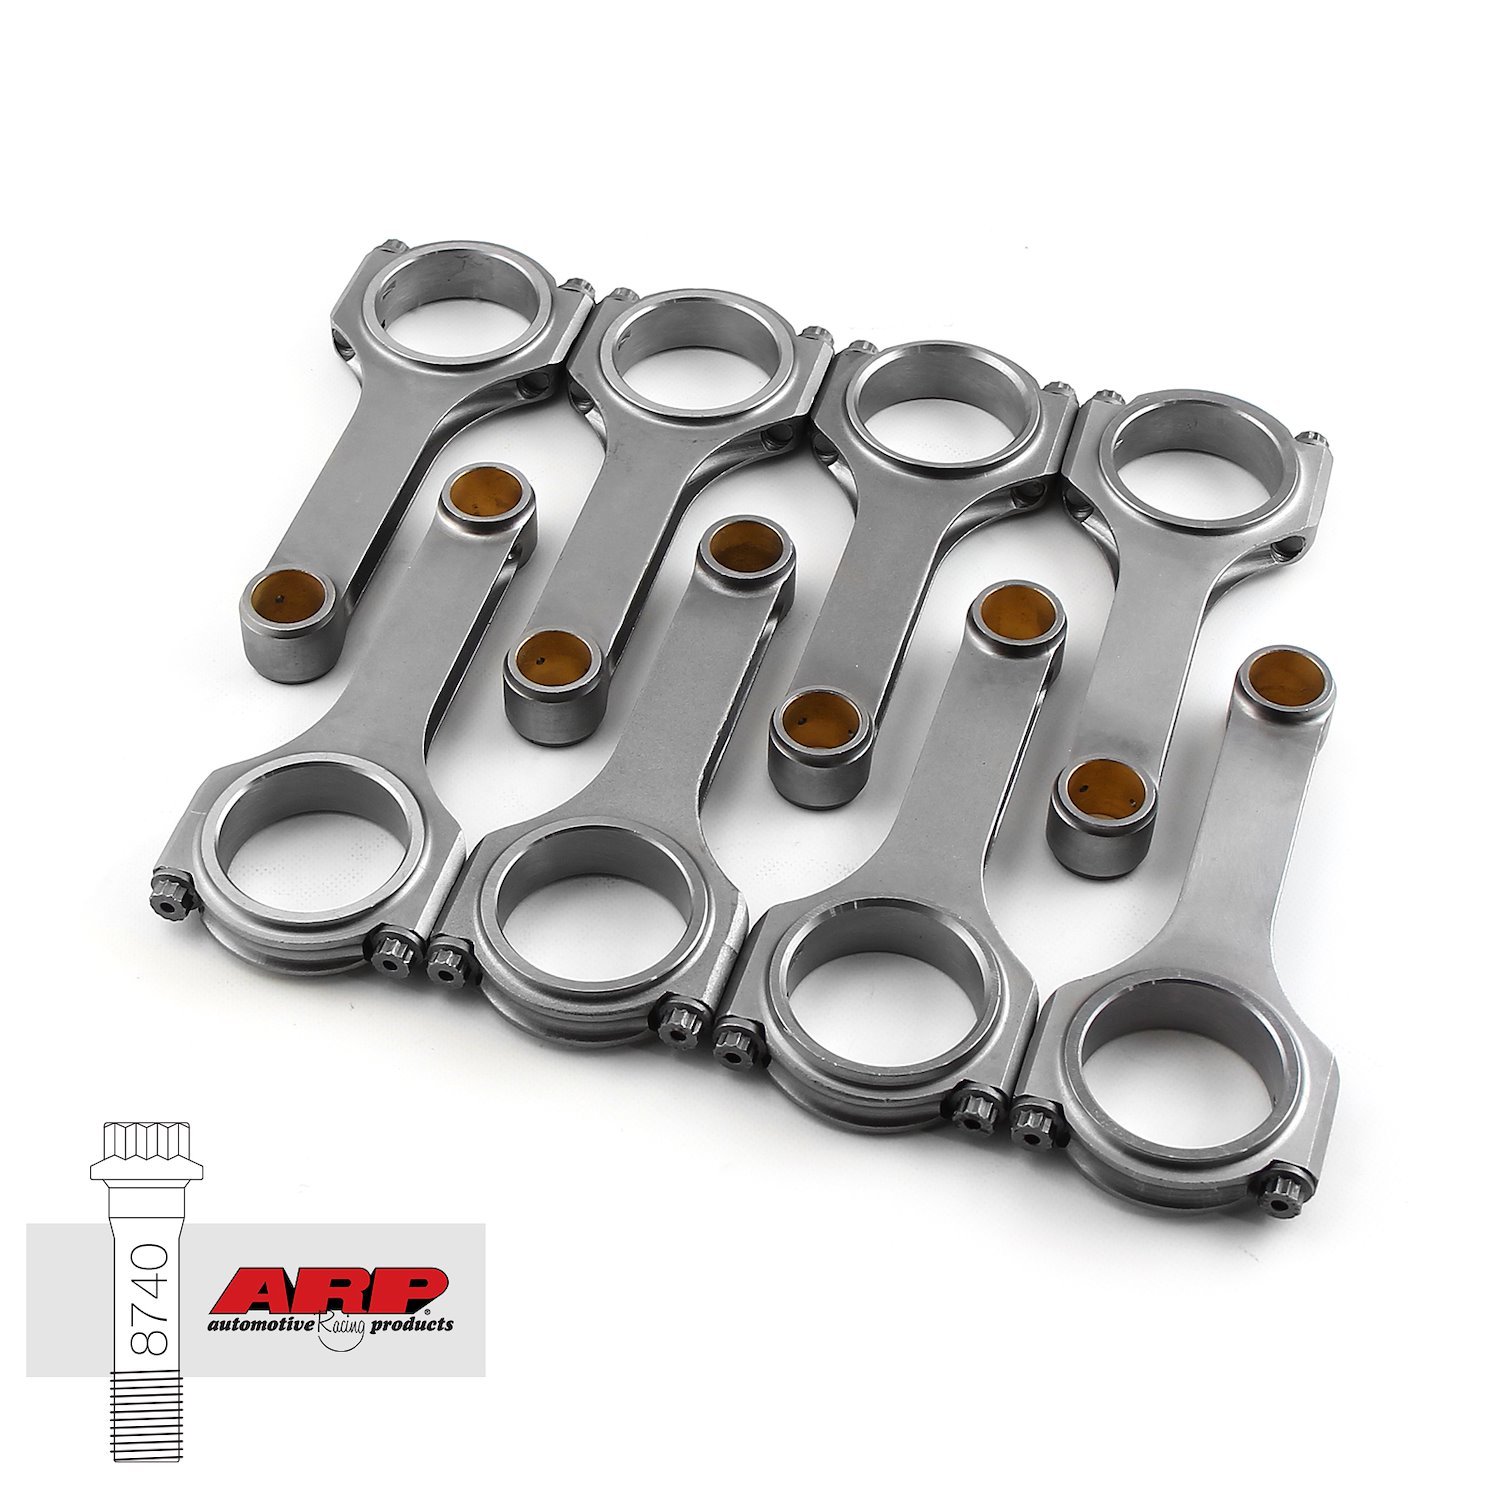 1-274-038 H Beam 6.385 in. 2.200 in. .990 in. 4340 Connecting Rods Chevy BBC 454 w/ ARP 2000